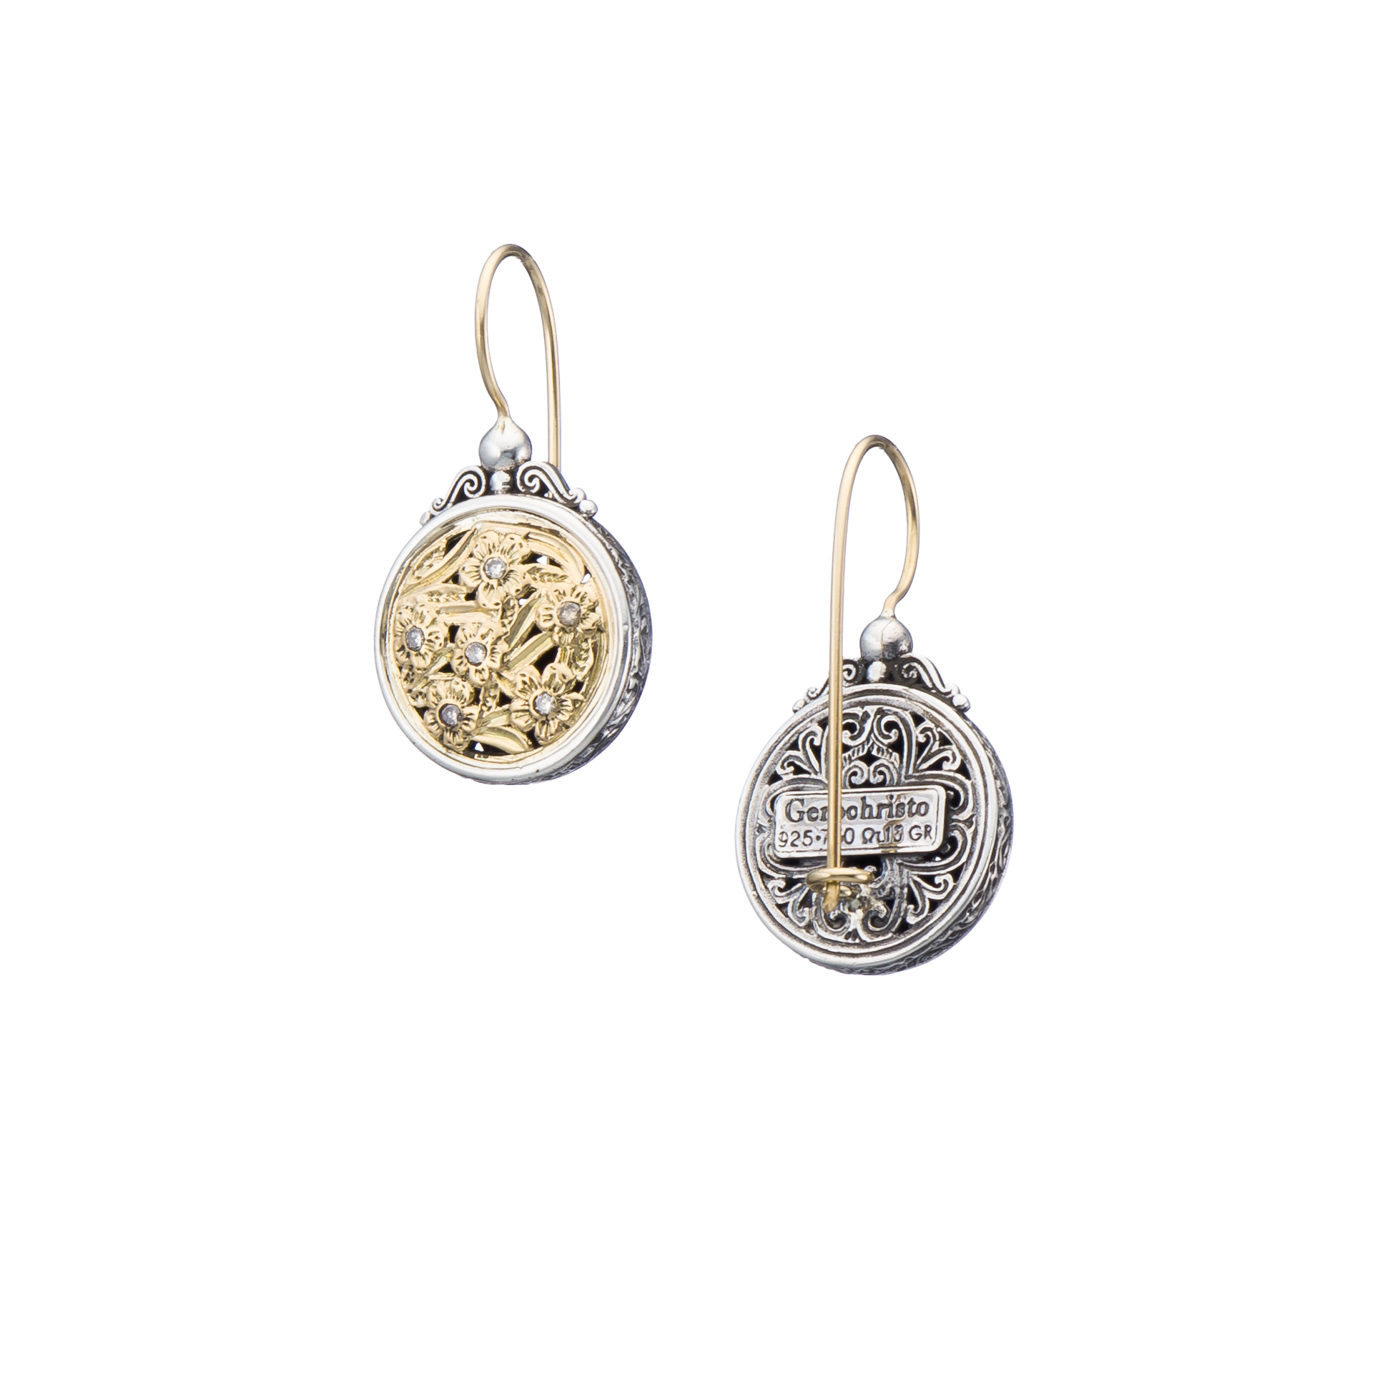 Harmony Round Earrings in 18K Gold and Sterling Silver with Brown Diamonds